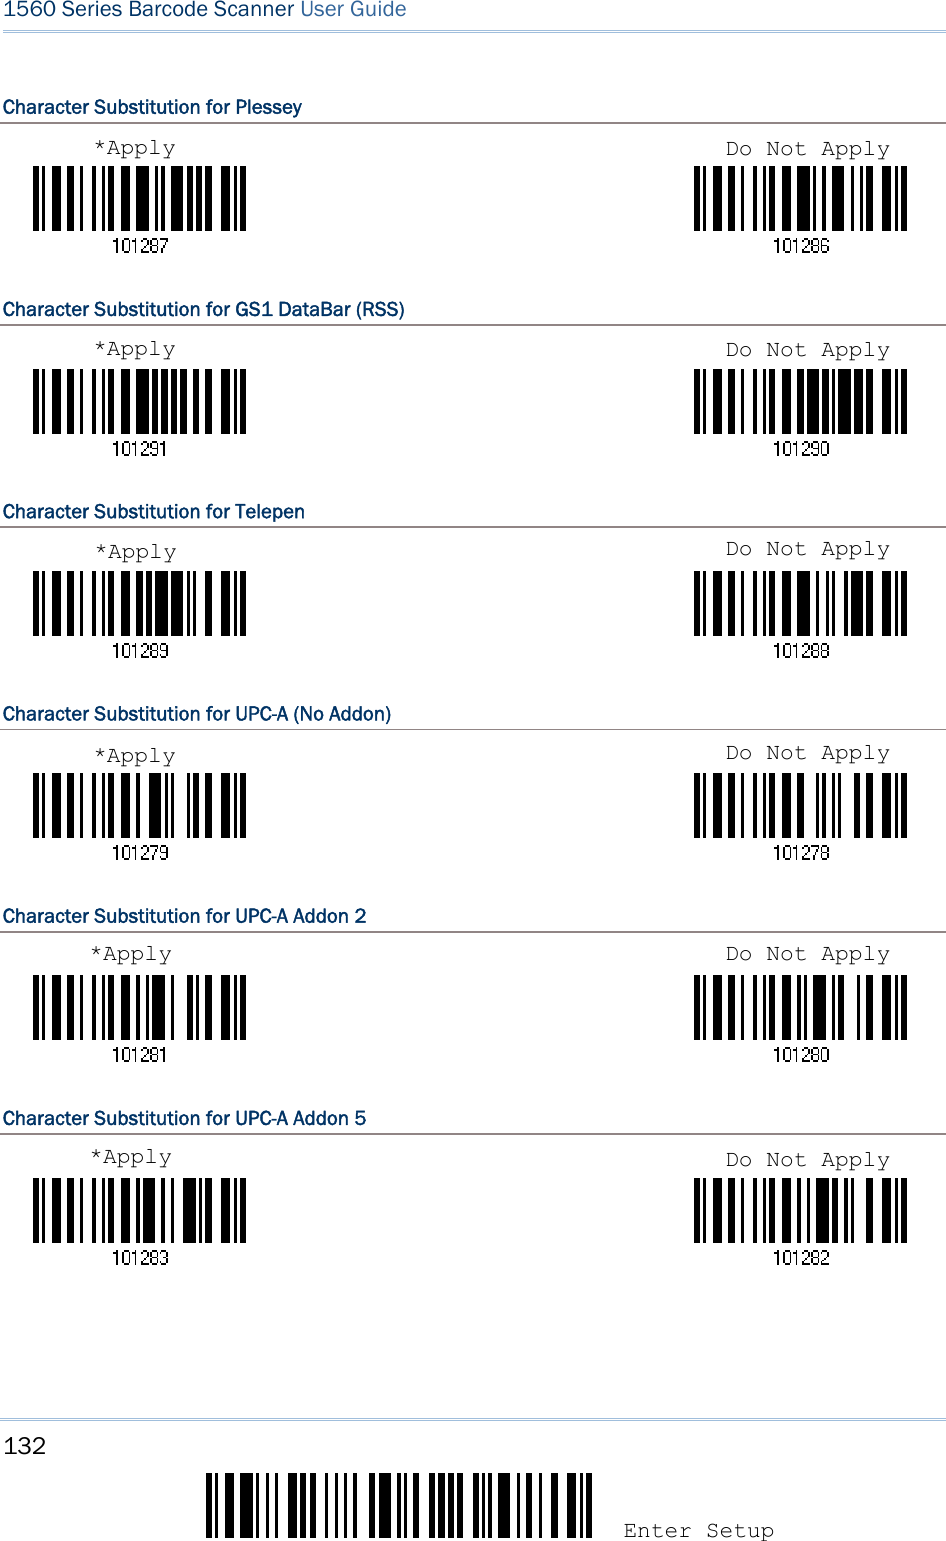 132 Enter Setup 1560 Series Barcode Scanner User Guide  Character Substitution for Plessey                                       Character Substitution for GS1 DataBar (RSS)                                       Character Substitution for Telepen                                       Character Substitution for UPC-A (No Addon)                                       Character Substitution for UPC-A Addon 2                                       Character Substitution for UPC-A Addon 5                                          *Apply Do Not Apply*Apply Do Not Apply*Apply Do Not Apply*Apply Do Not Apply*Apply Do Not Apply*Apply Do Not Apply